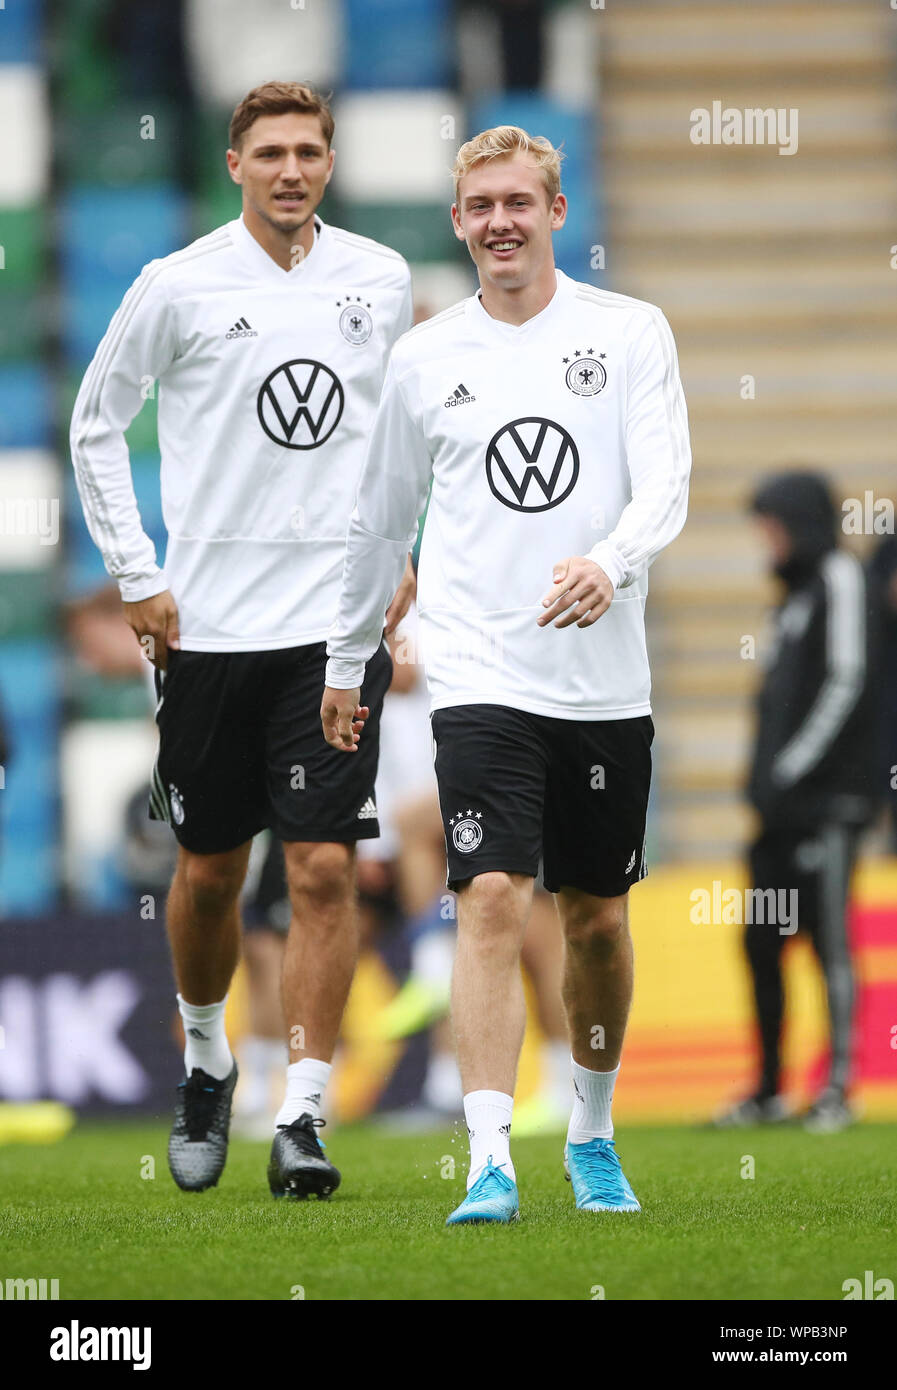 Belfast, UK. 08th Sep, 2019. Soccer: National team, final training Germany before the European Championship qualifier Northern Ireland - Germany in Windsor Park Stadium. The national players Julian Brandt (r) and Niklas Stark warm up. Credit: Christian Charisius/dpa/Alamy Live News Stock Photo